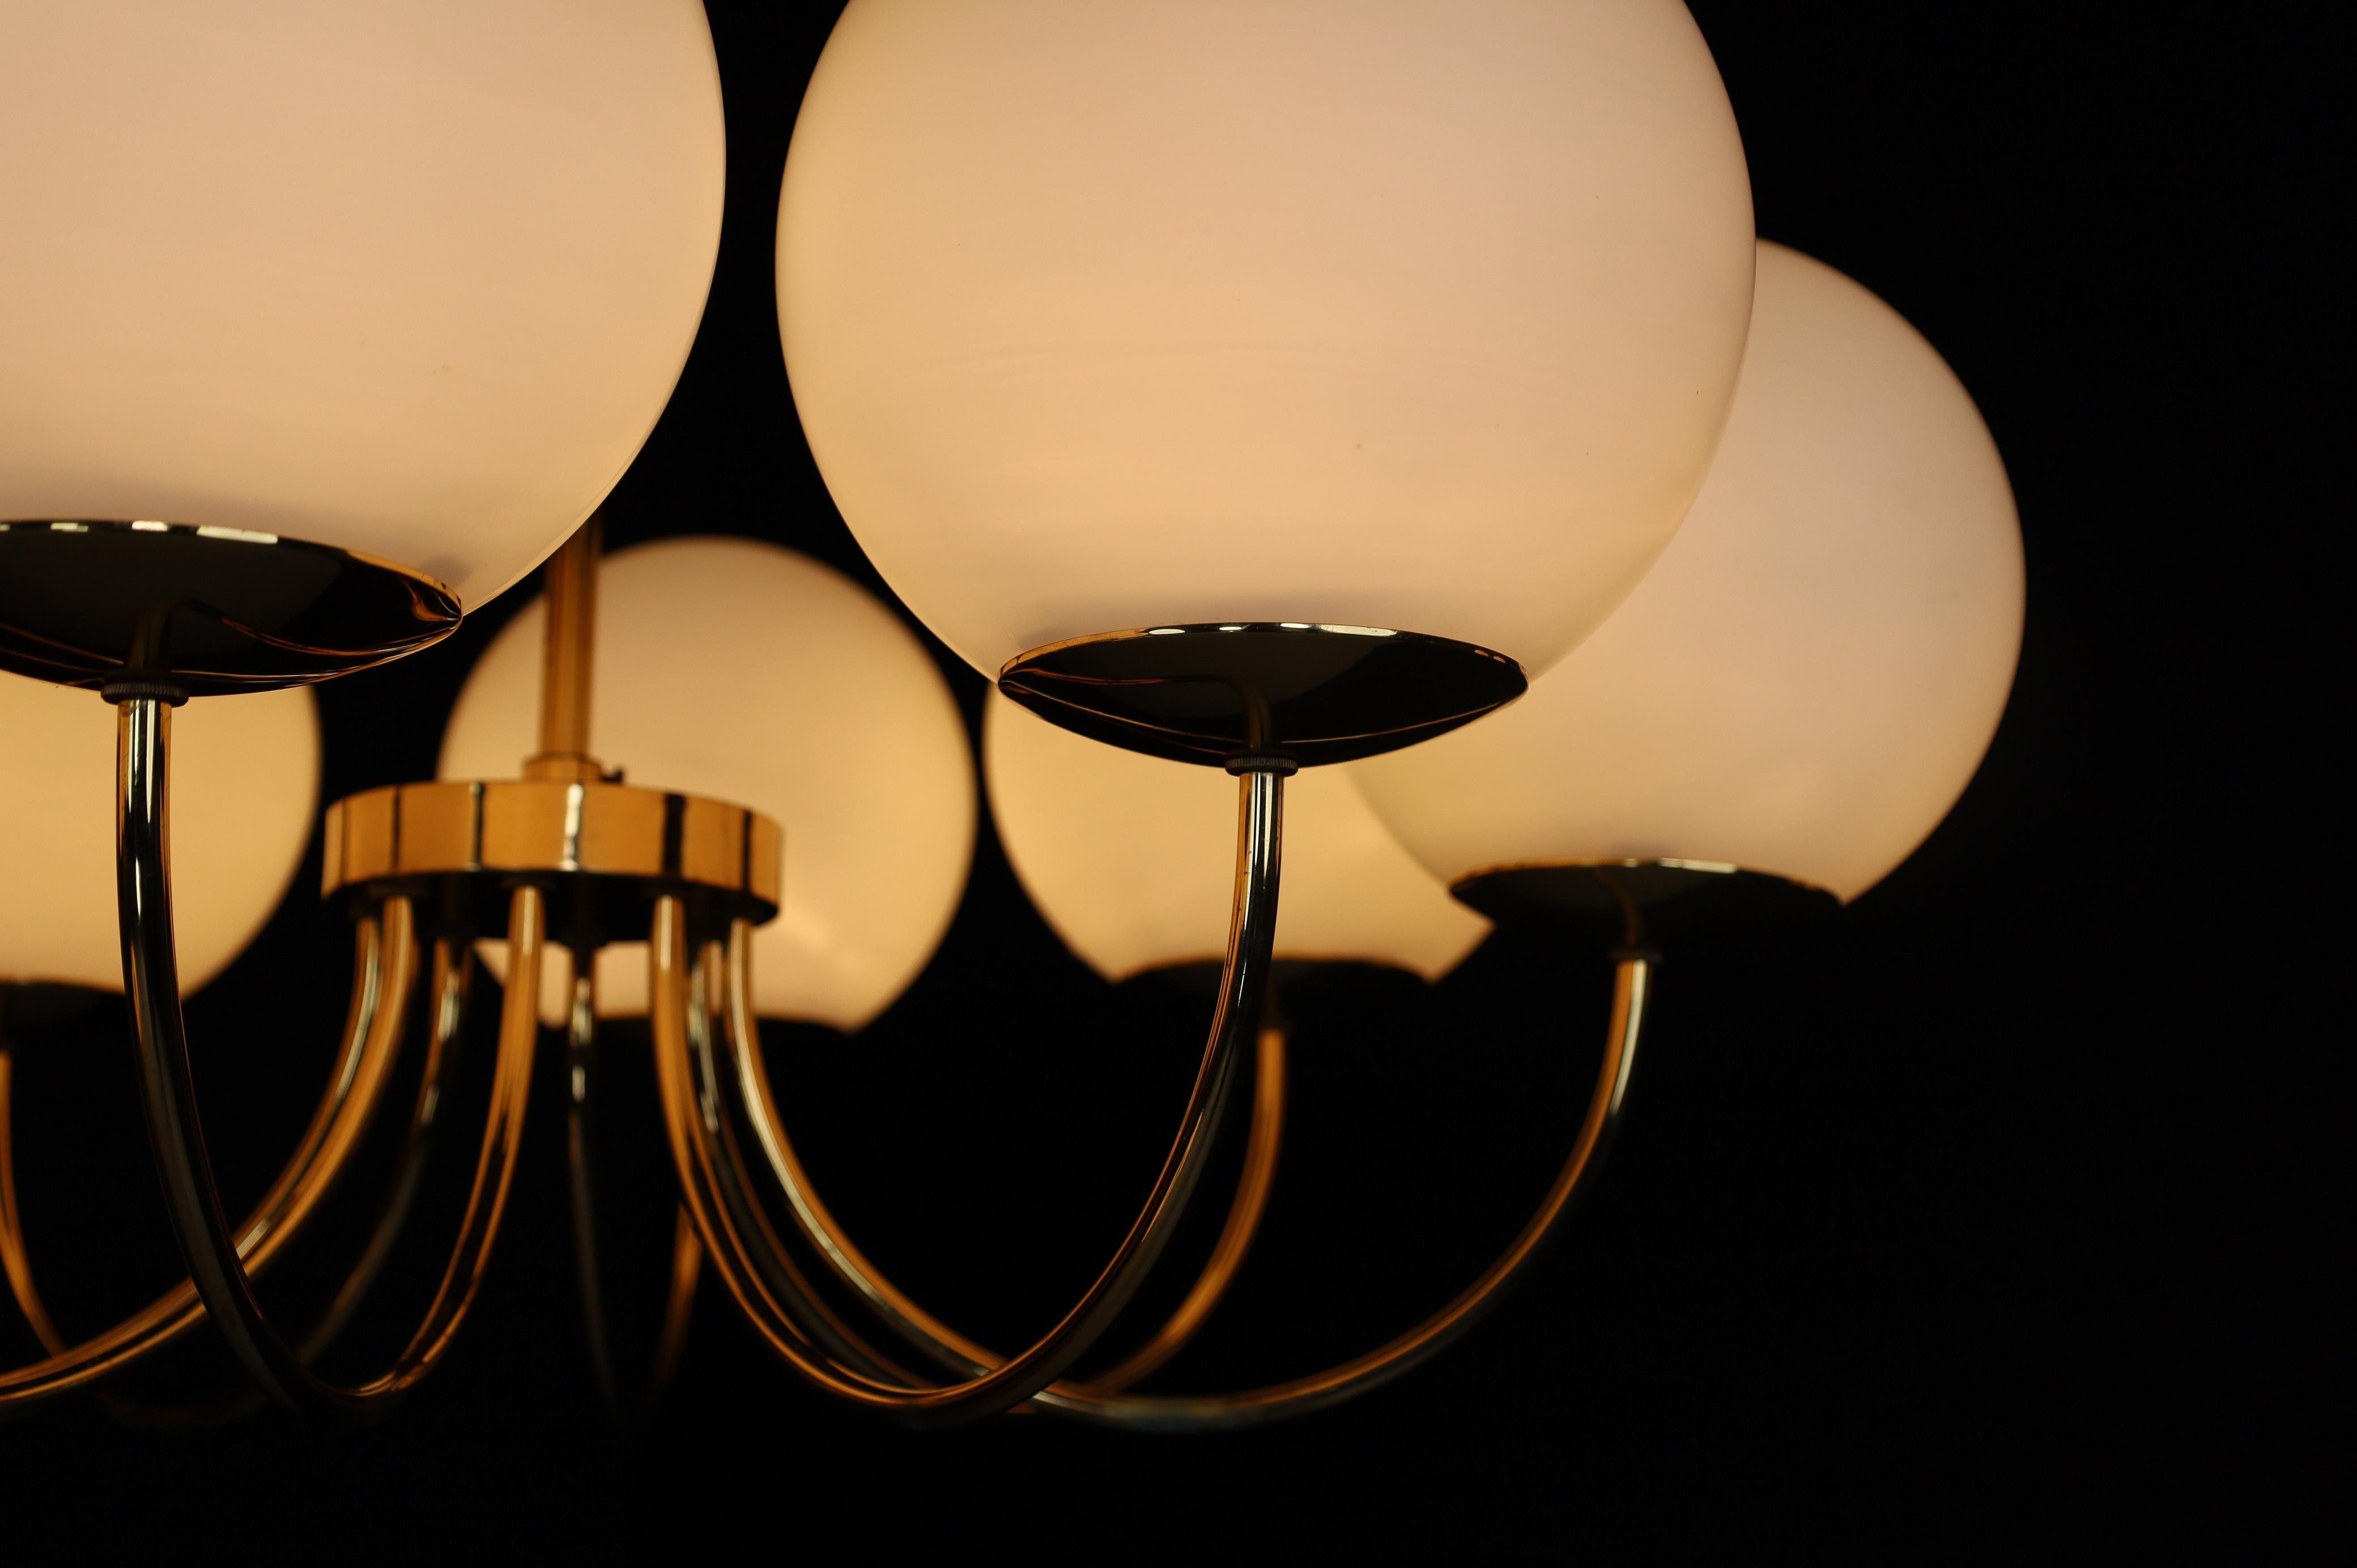 1 of 3 Elegant Chandeliers with Brass Fixture and Opaline Glass Globes, 1960s For Sale 7